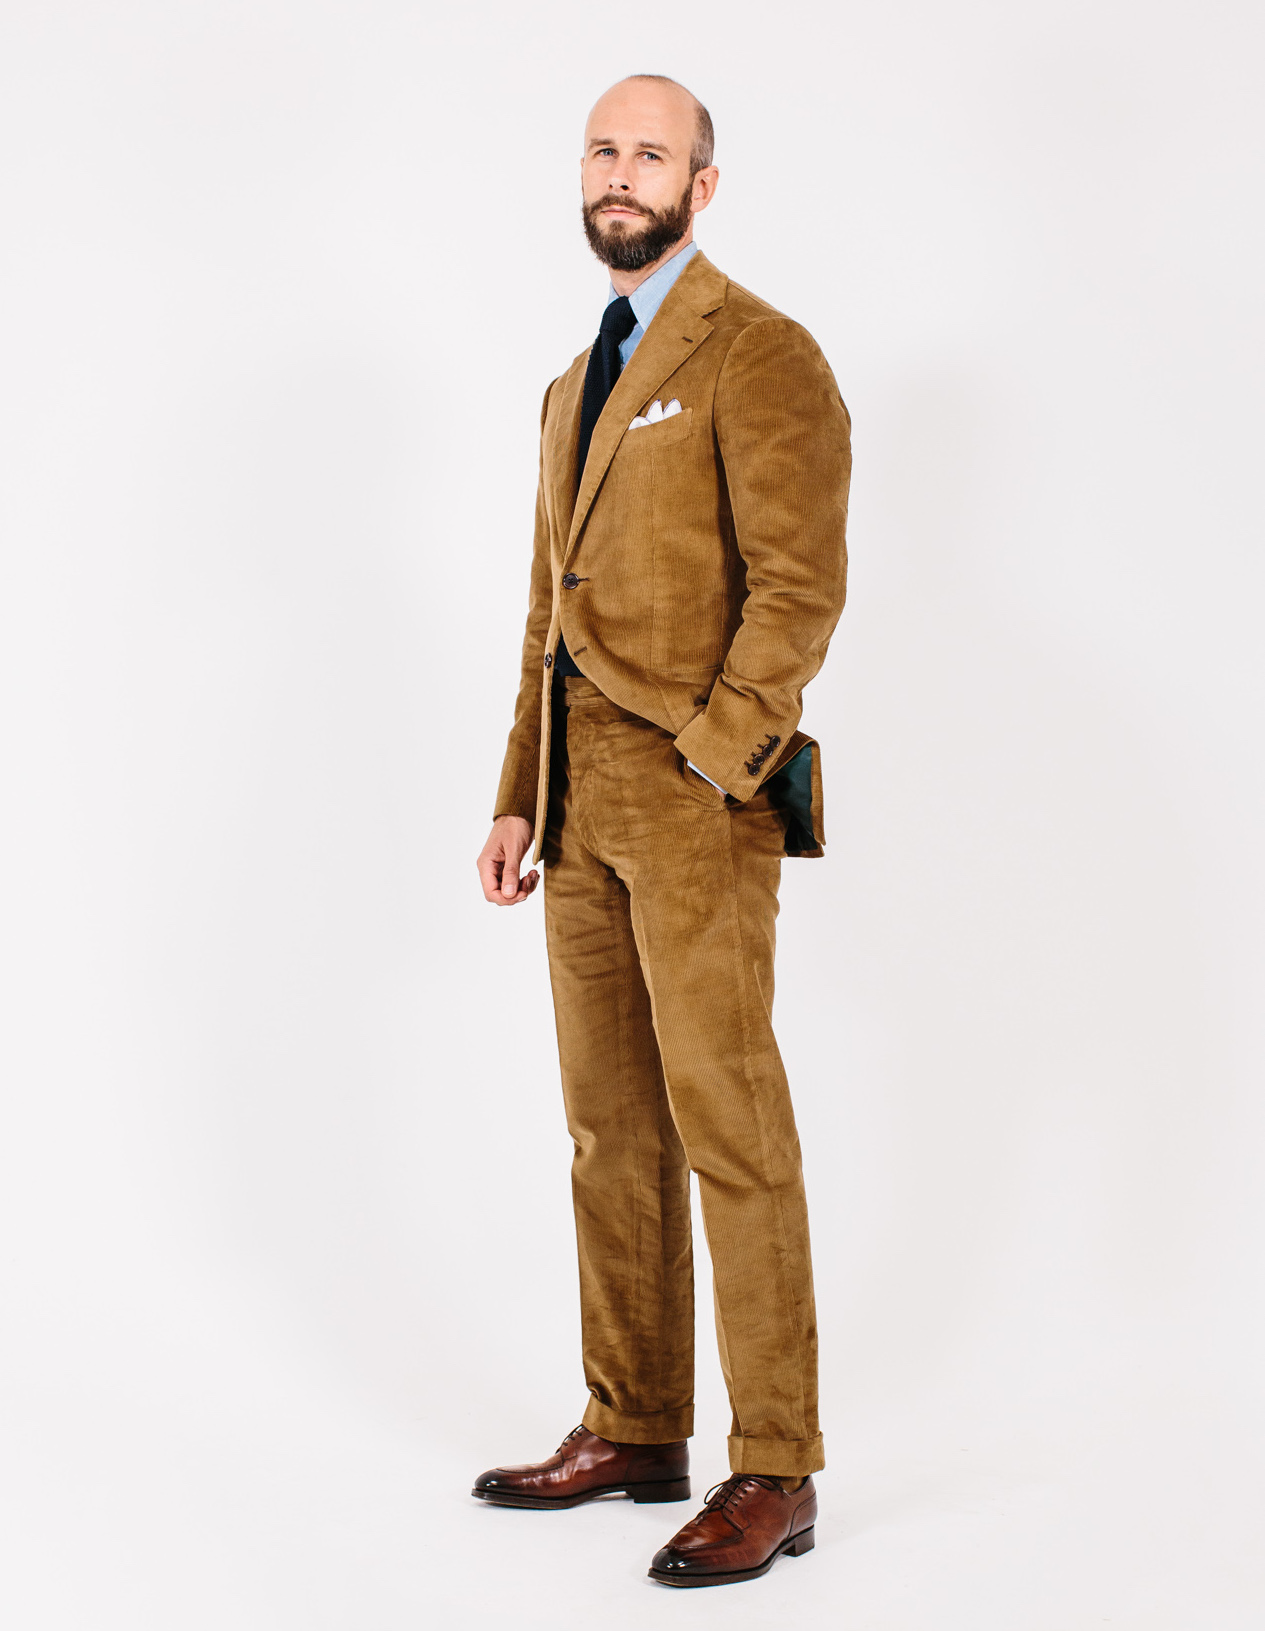 The Top Men's Trends Fall 2019: Louche and Elegant Suits - Global